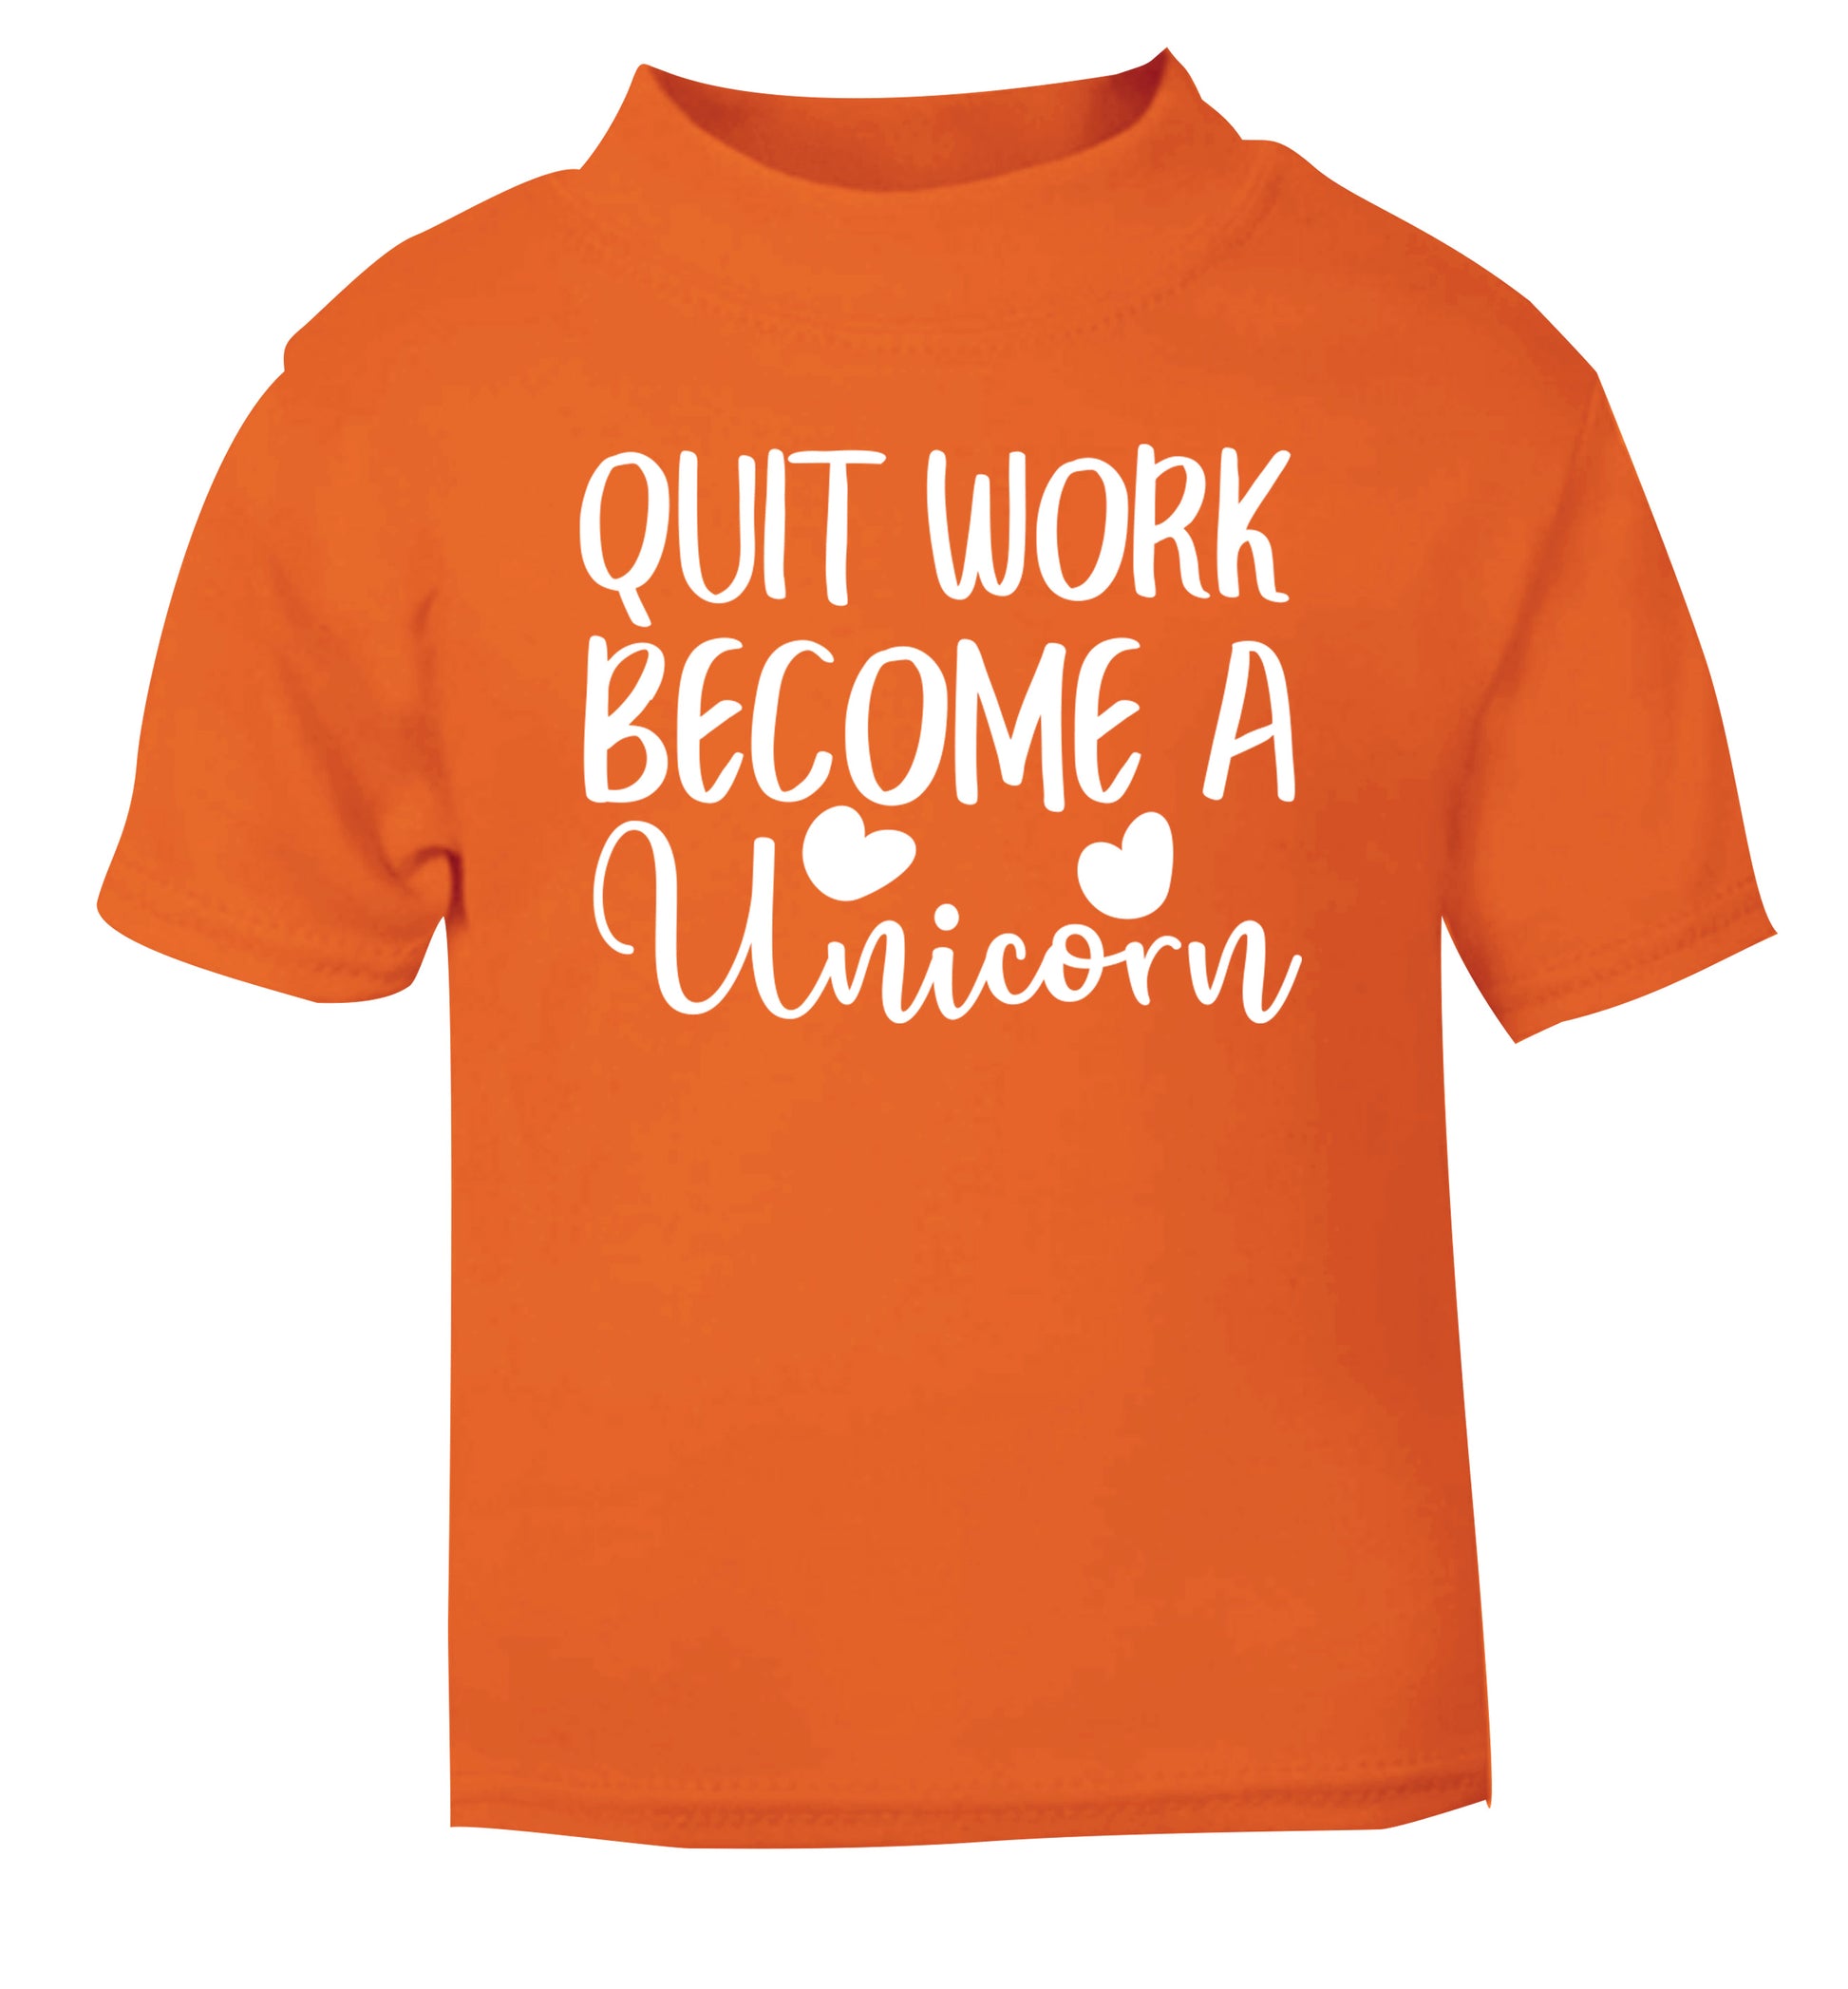 Quit work become a unicorn orange Baby Toddler Tshirt 2 Years